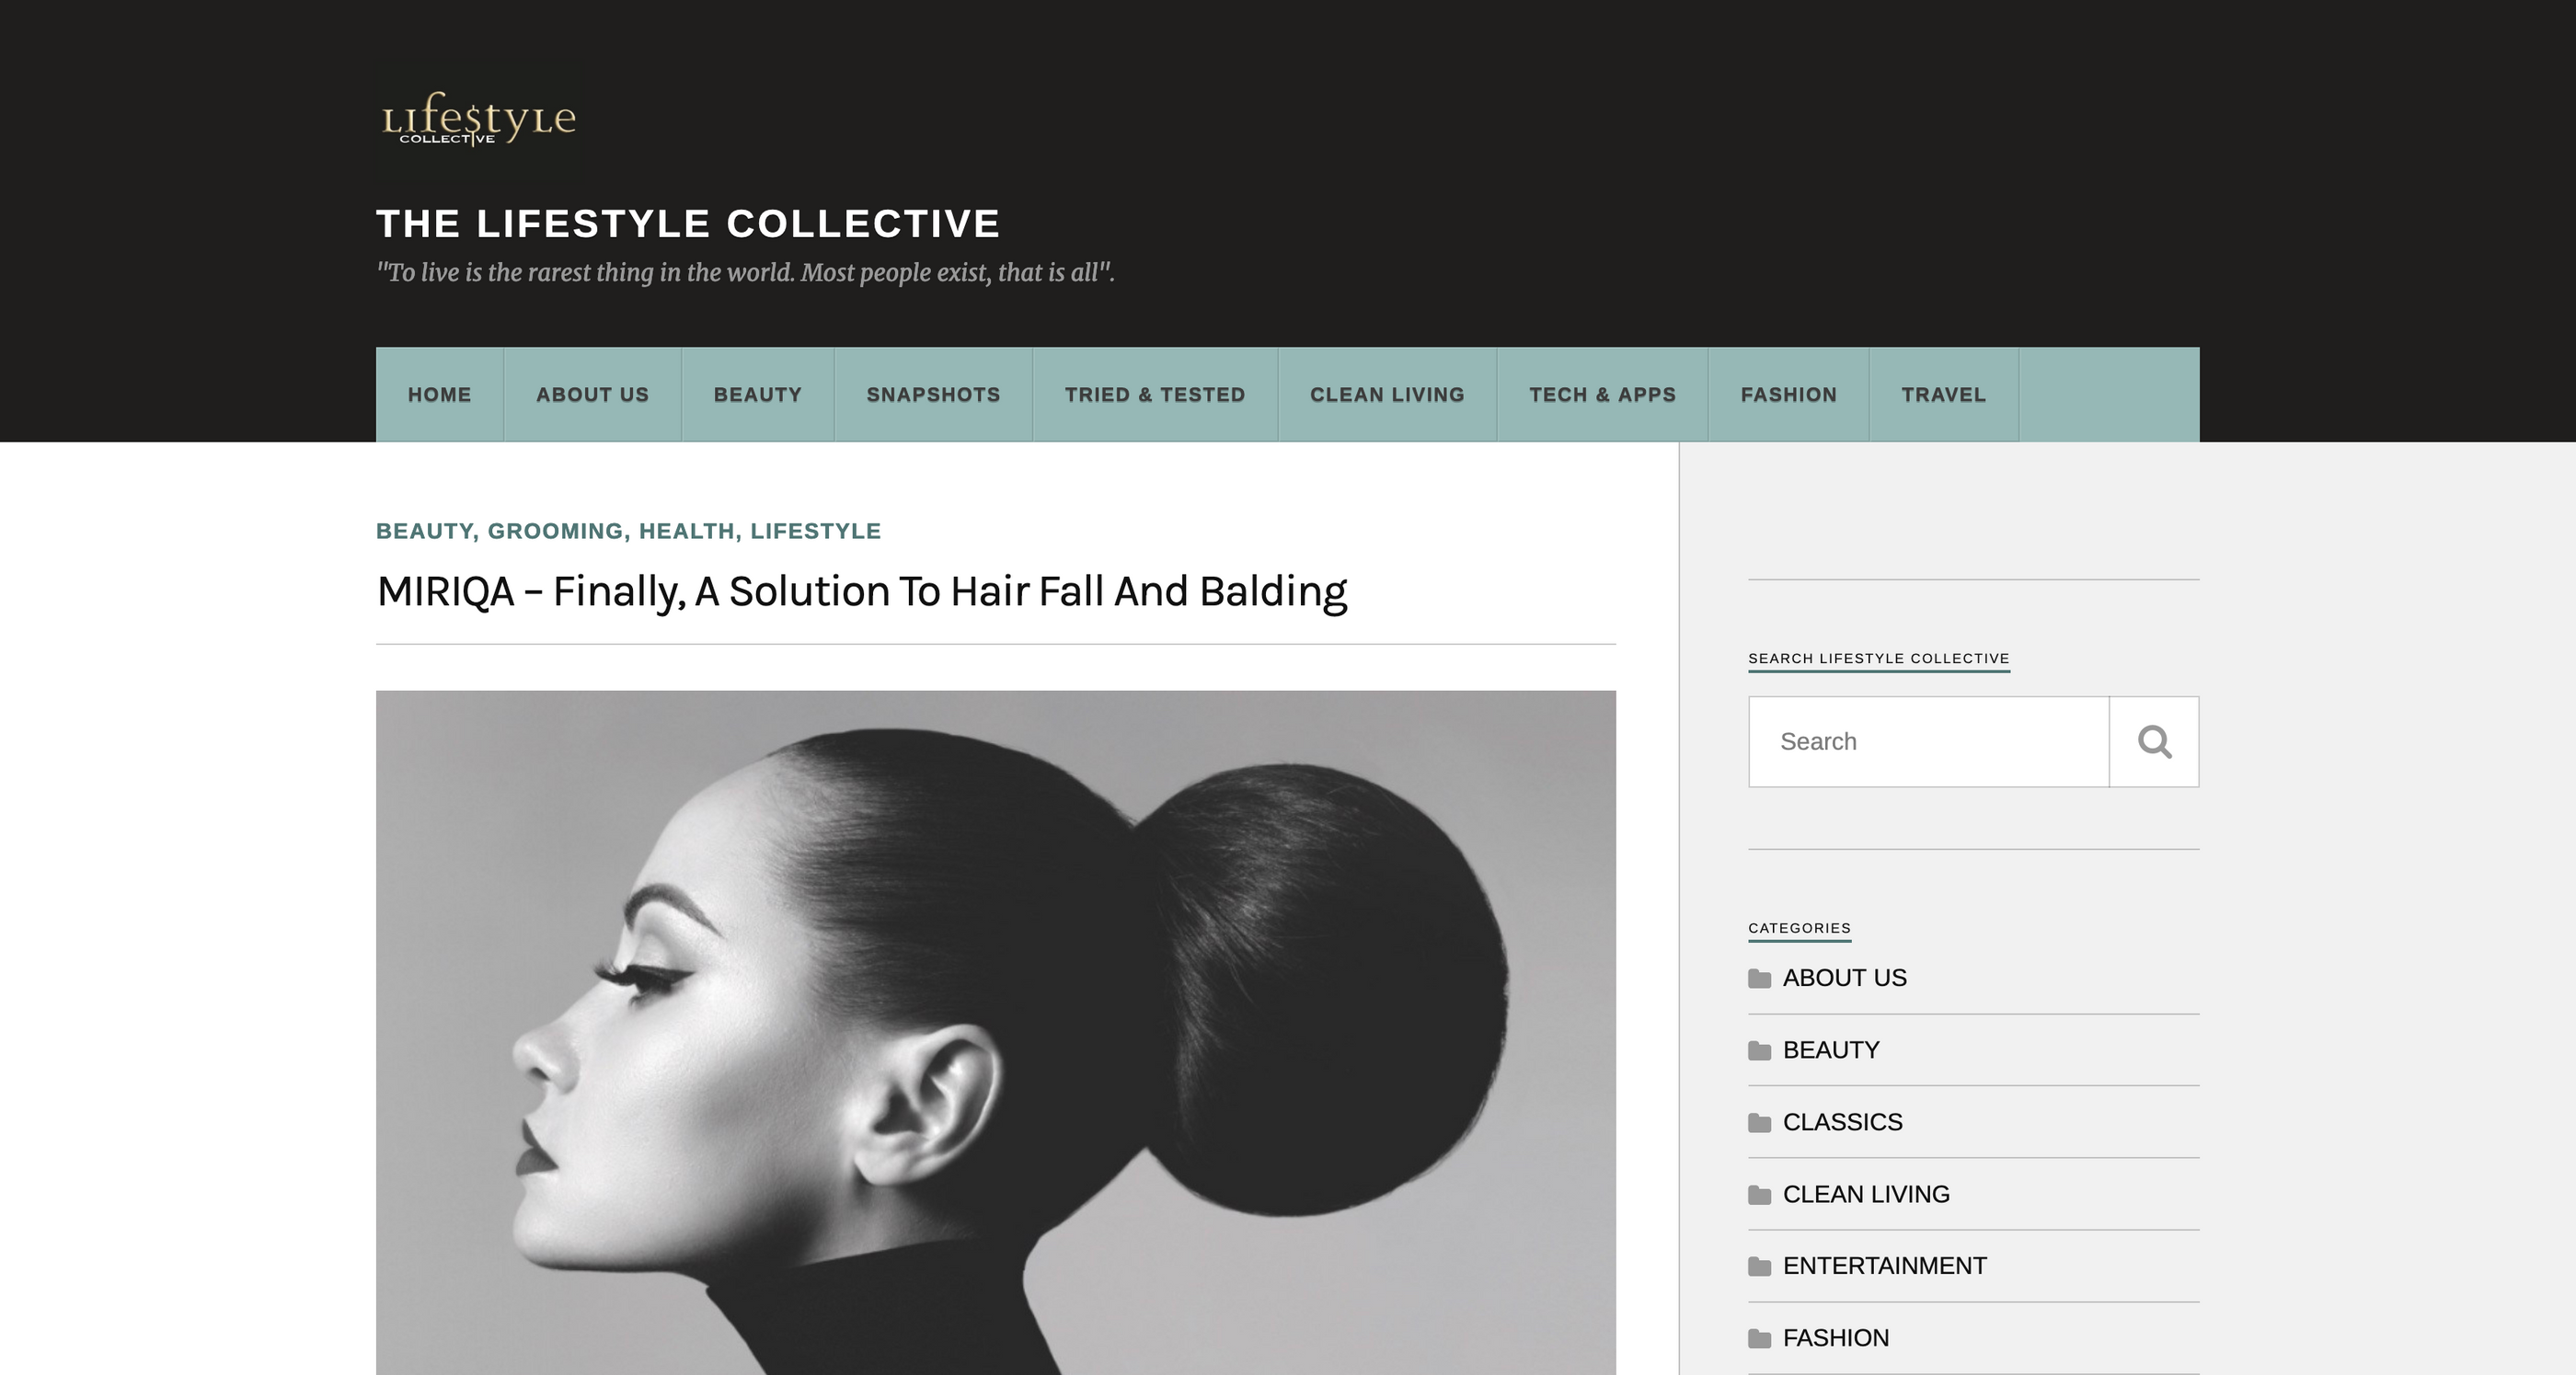 MIRIQA® – Finally, A Solution To Hair Fall And Balding by Lifestyle Collective